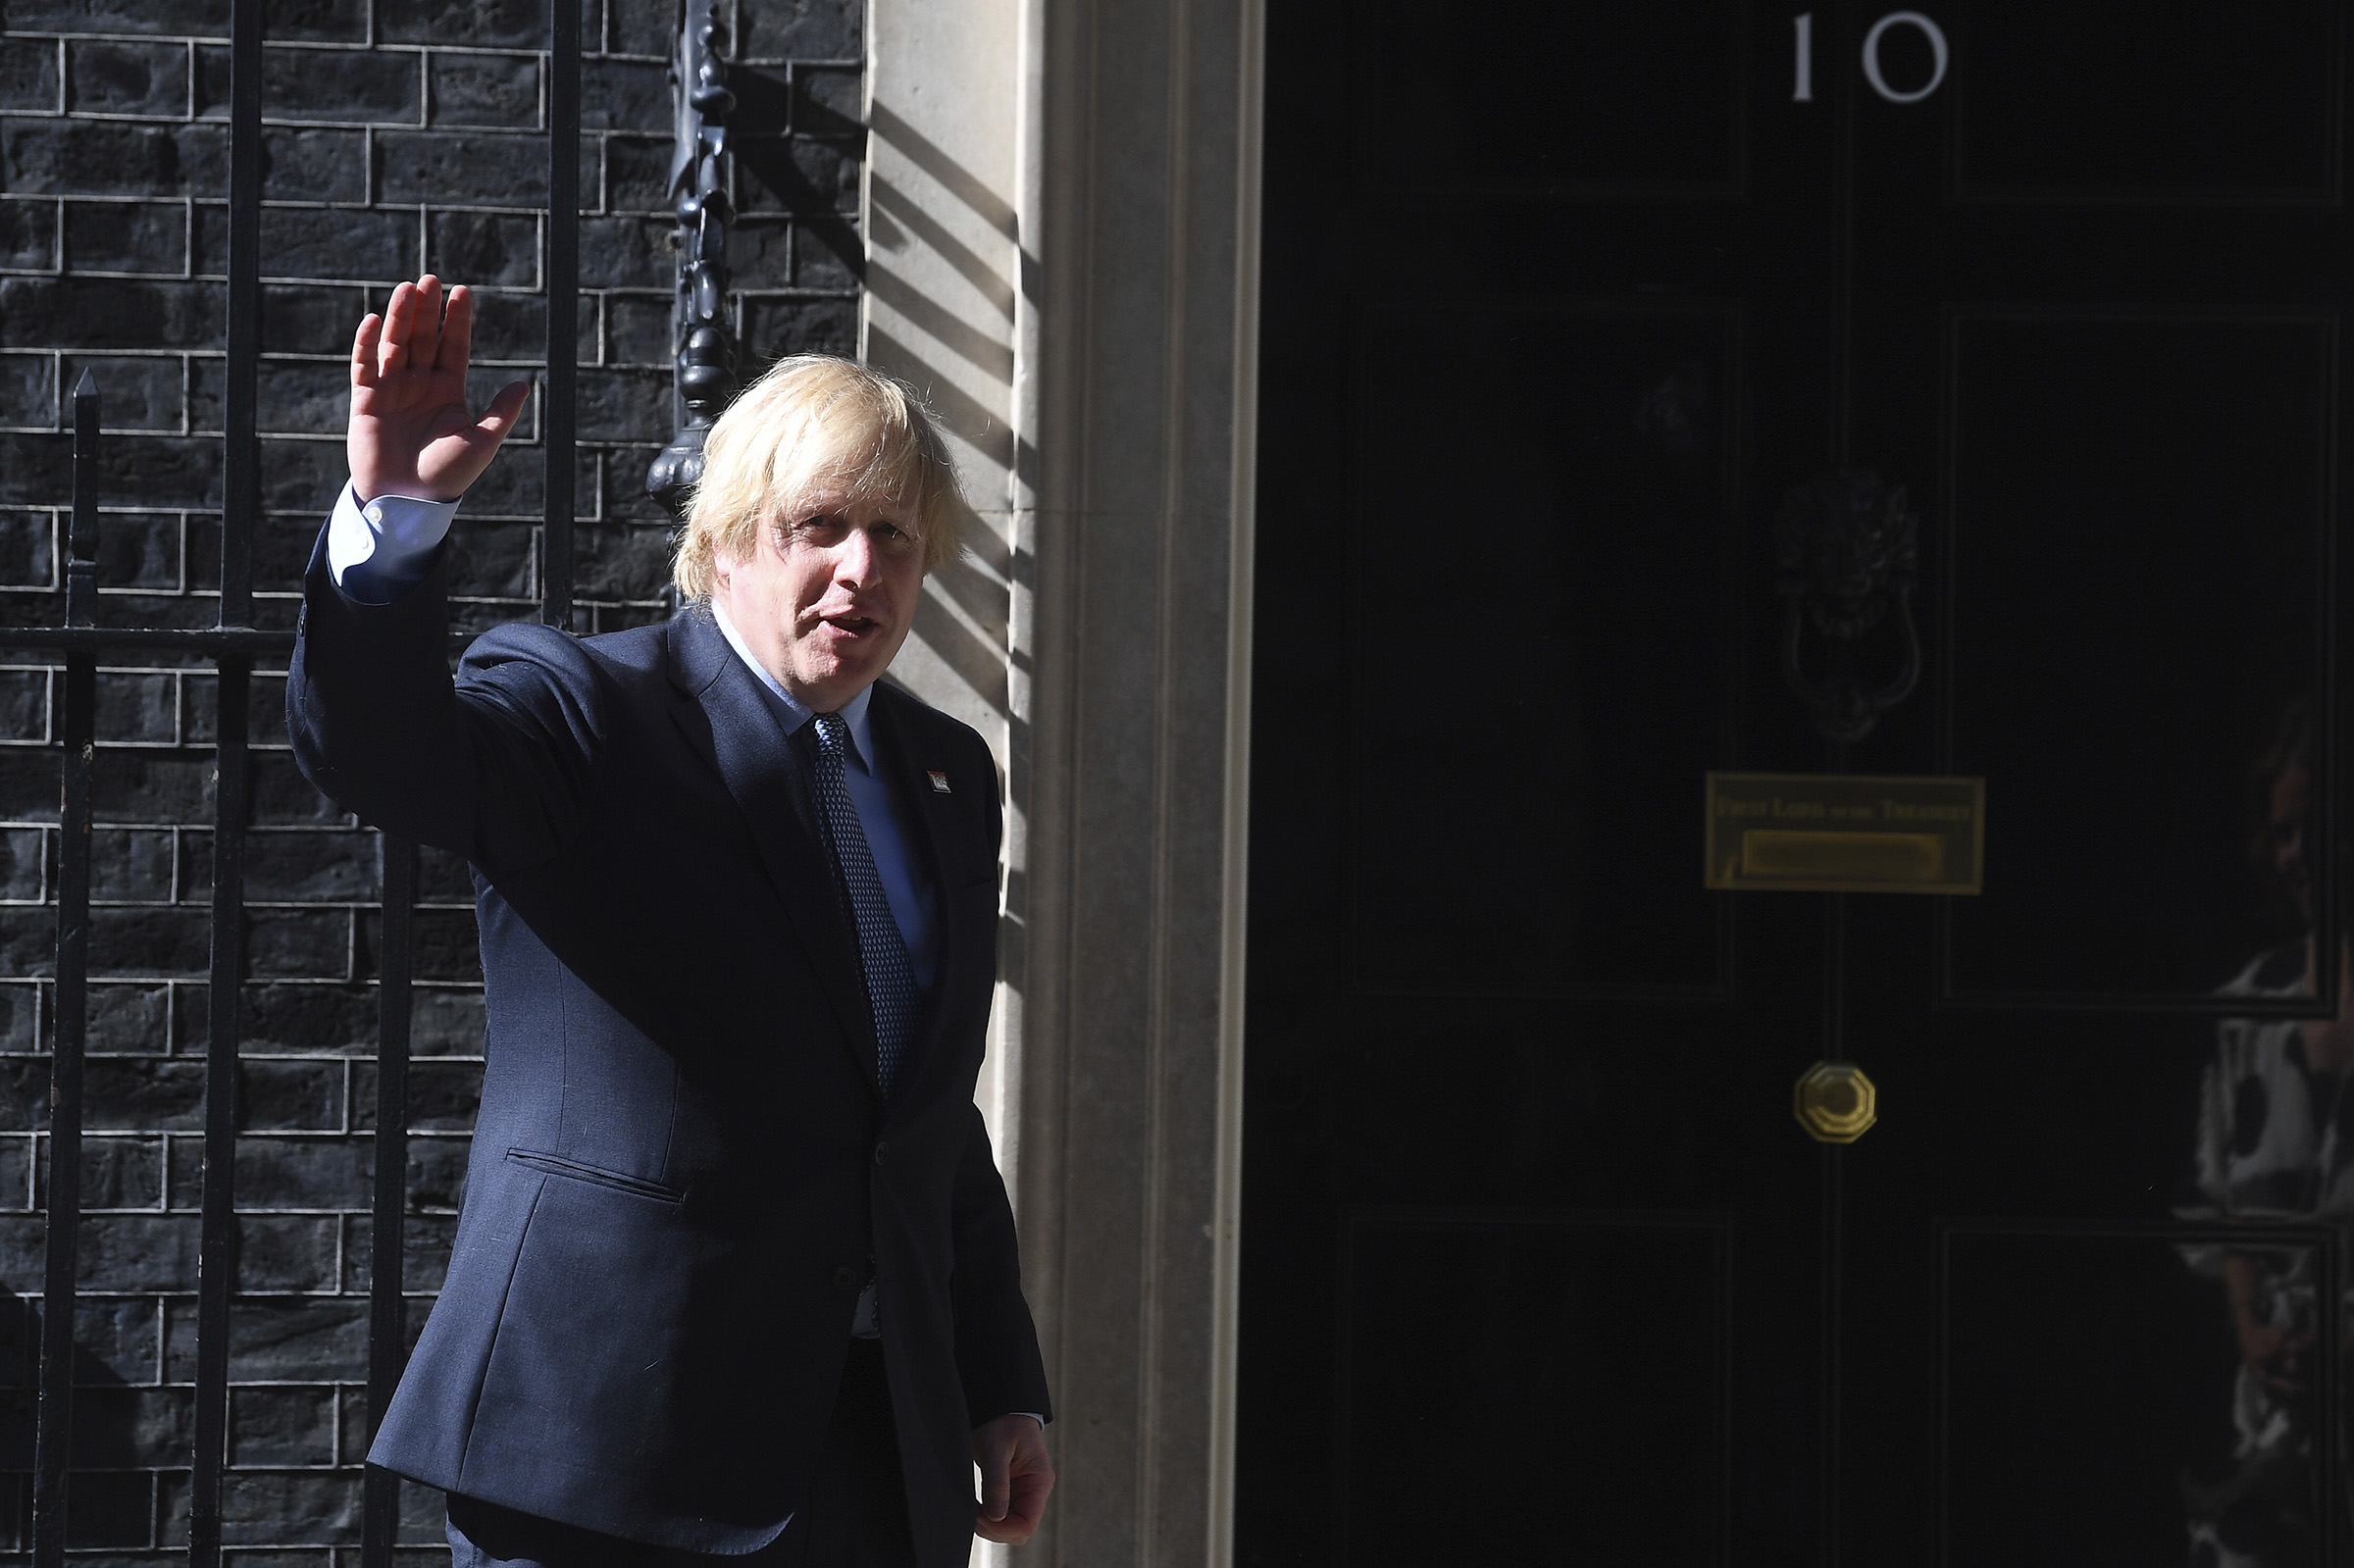 Prime Minister, Boris Johnson joins in the pause for applause to salute the NHS in London on July 5, 2020. (Press Association via AP)